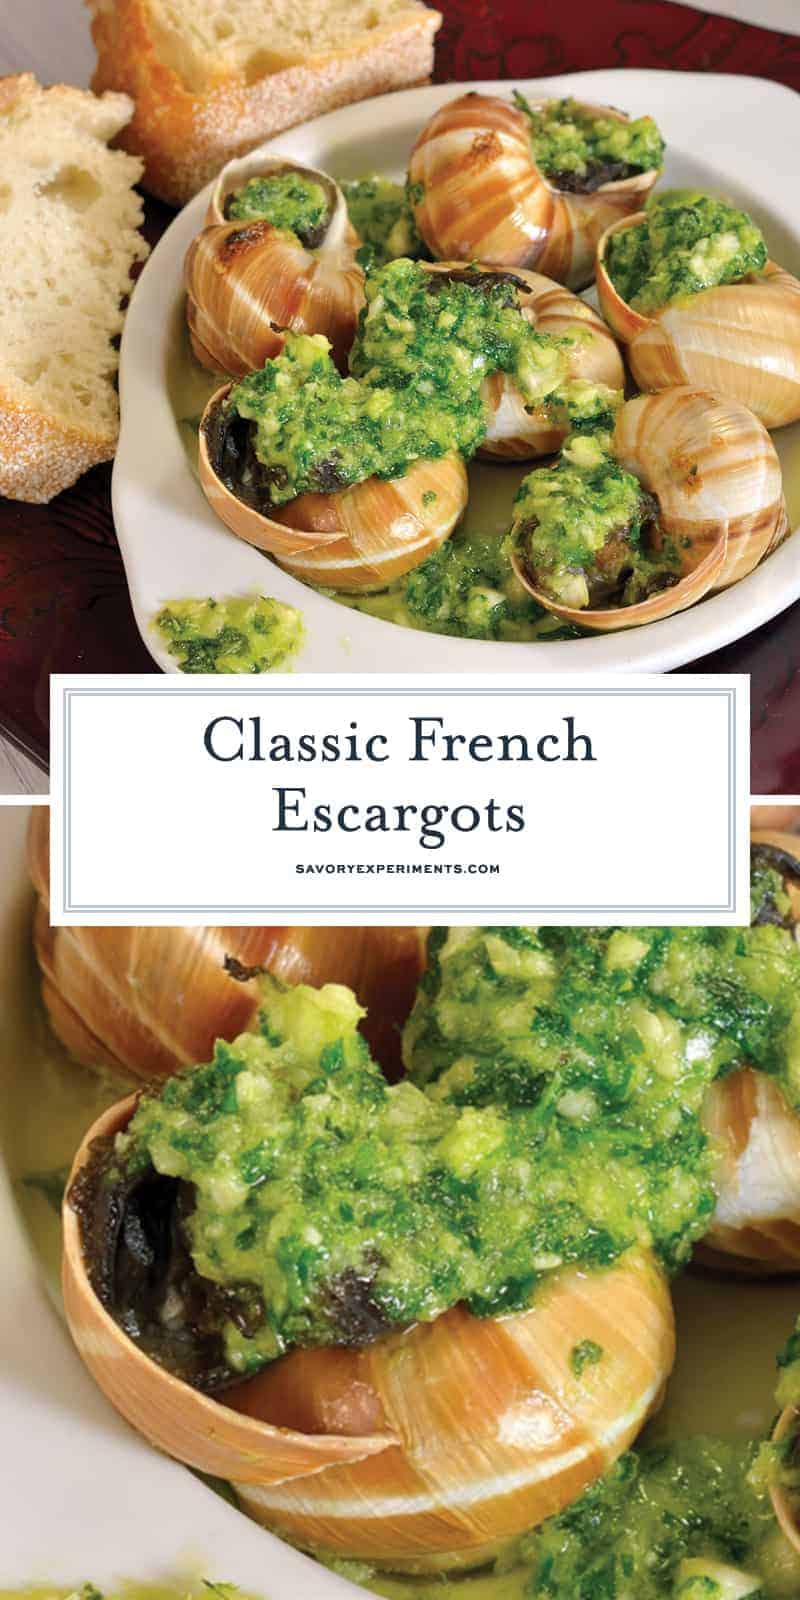 A recipe for Classic French Escargot with a parsley garlic butter in a shell or covered in puff pastry, make them however you'd like! #howtomakeescargot #frenchescargot www.savoryexperiments.com 